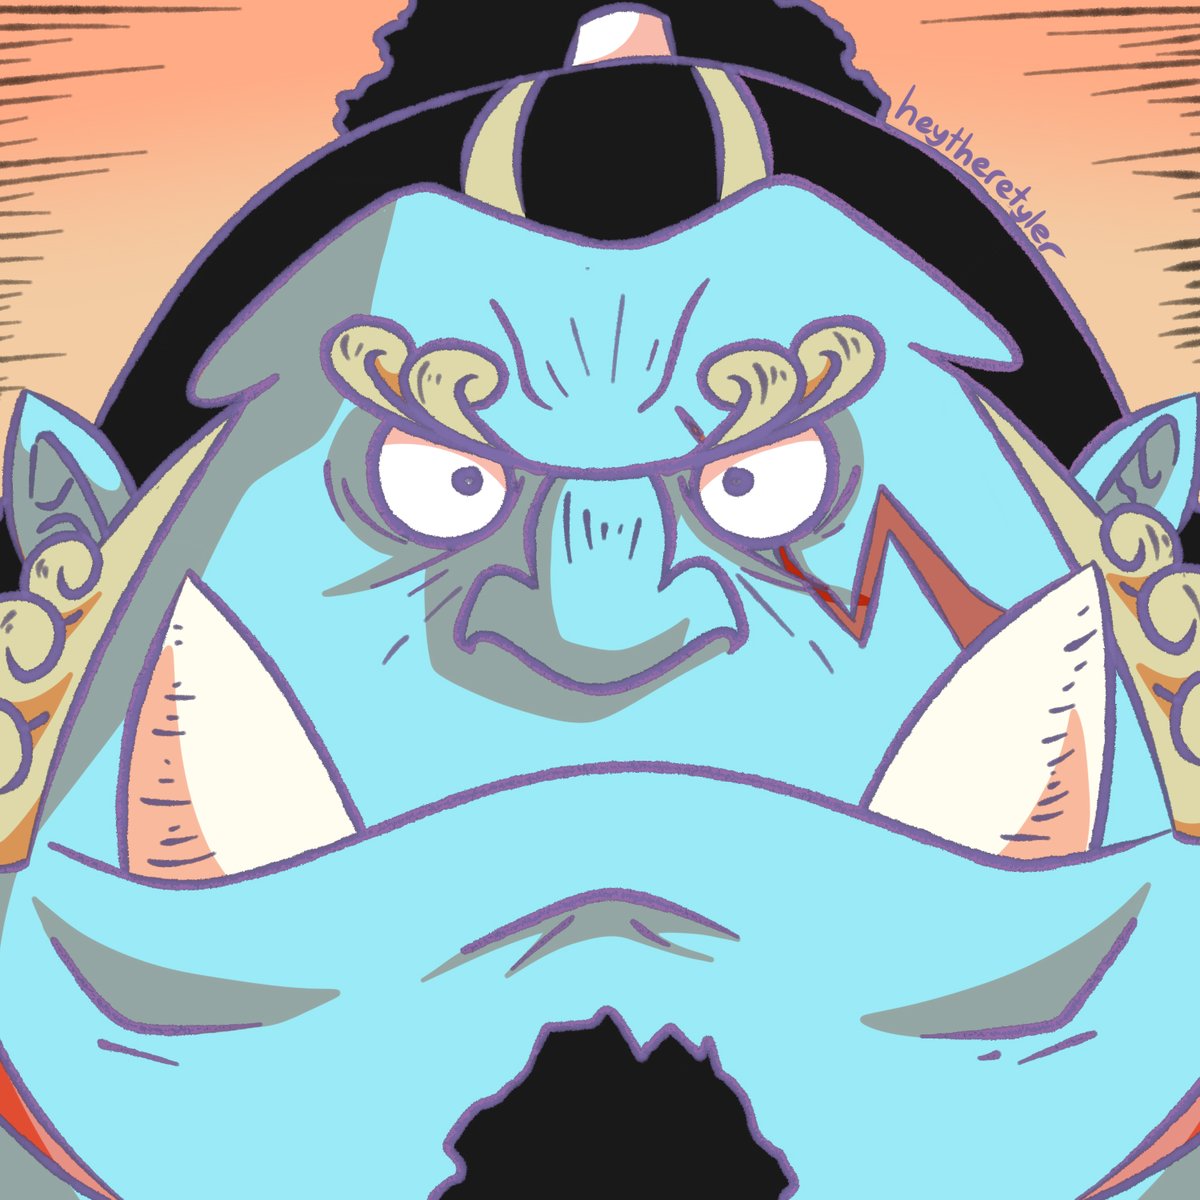 Decided to color Jinbei so I could use it as an avi